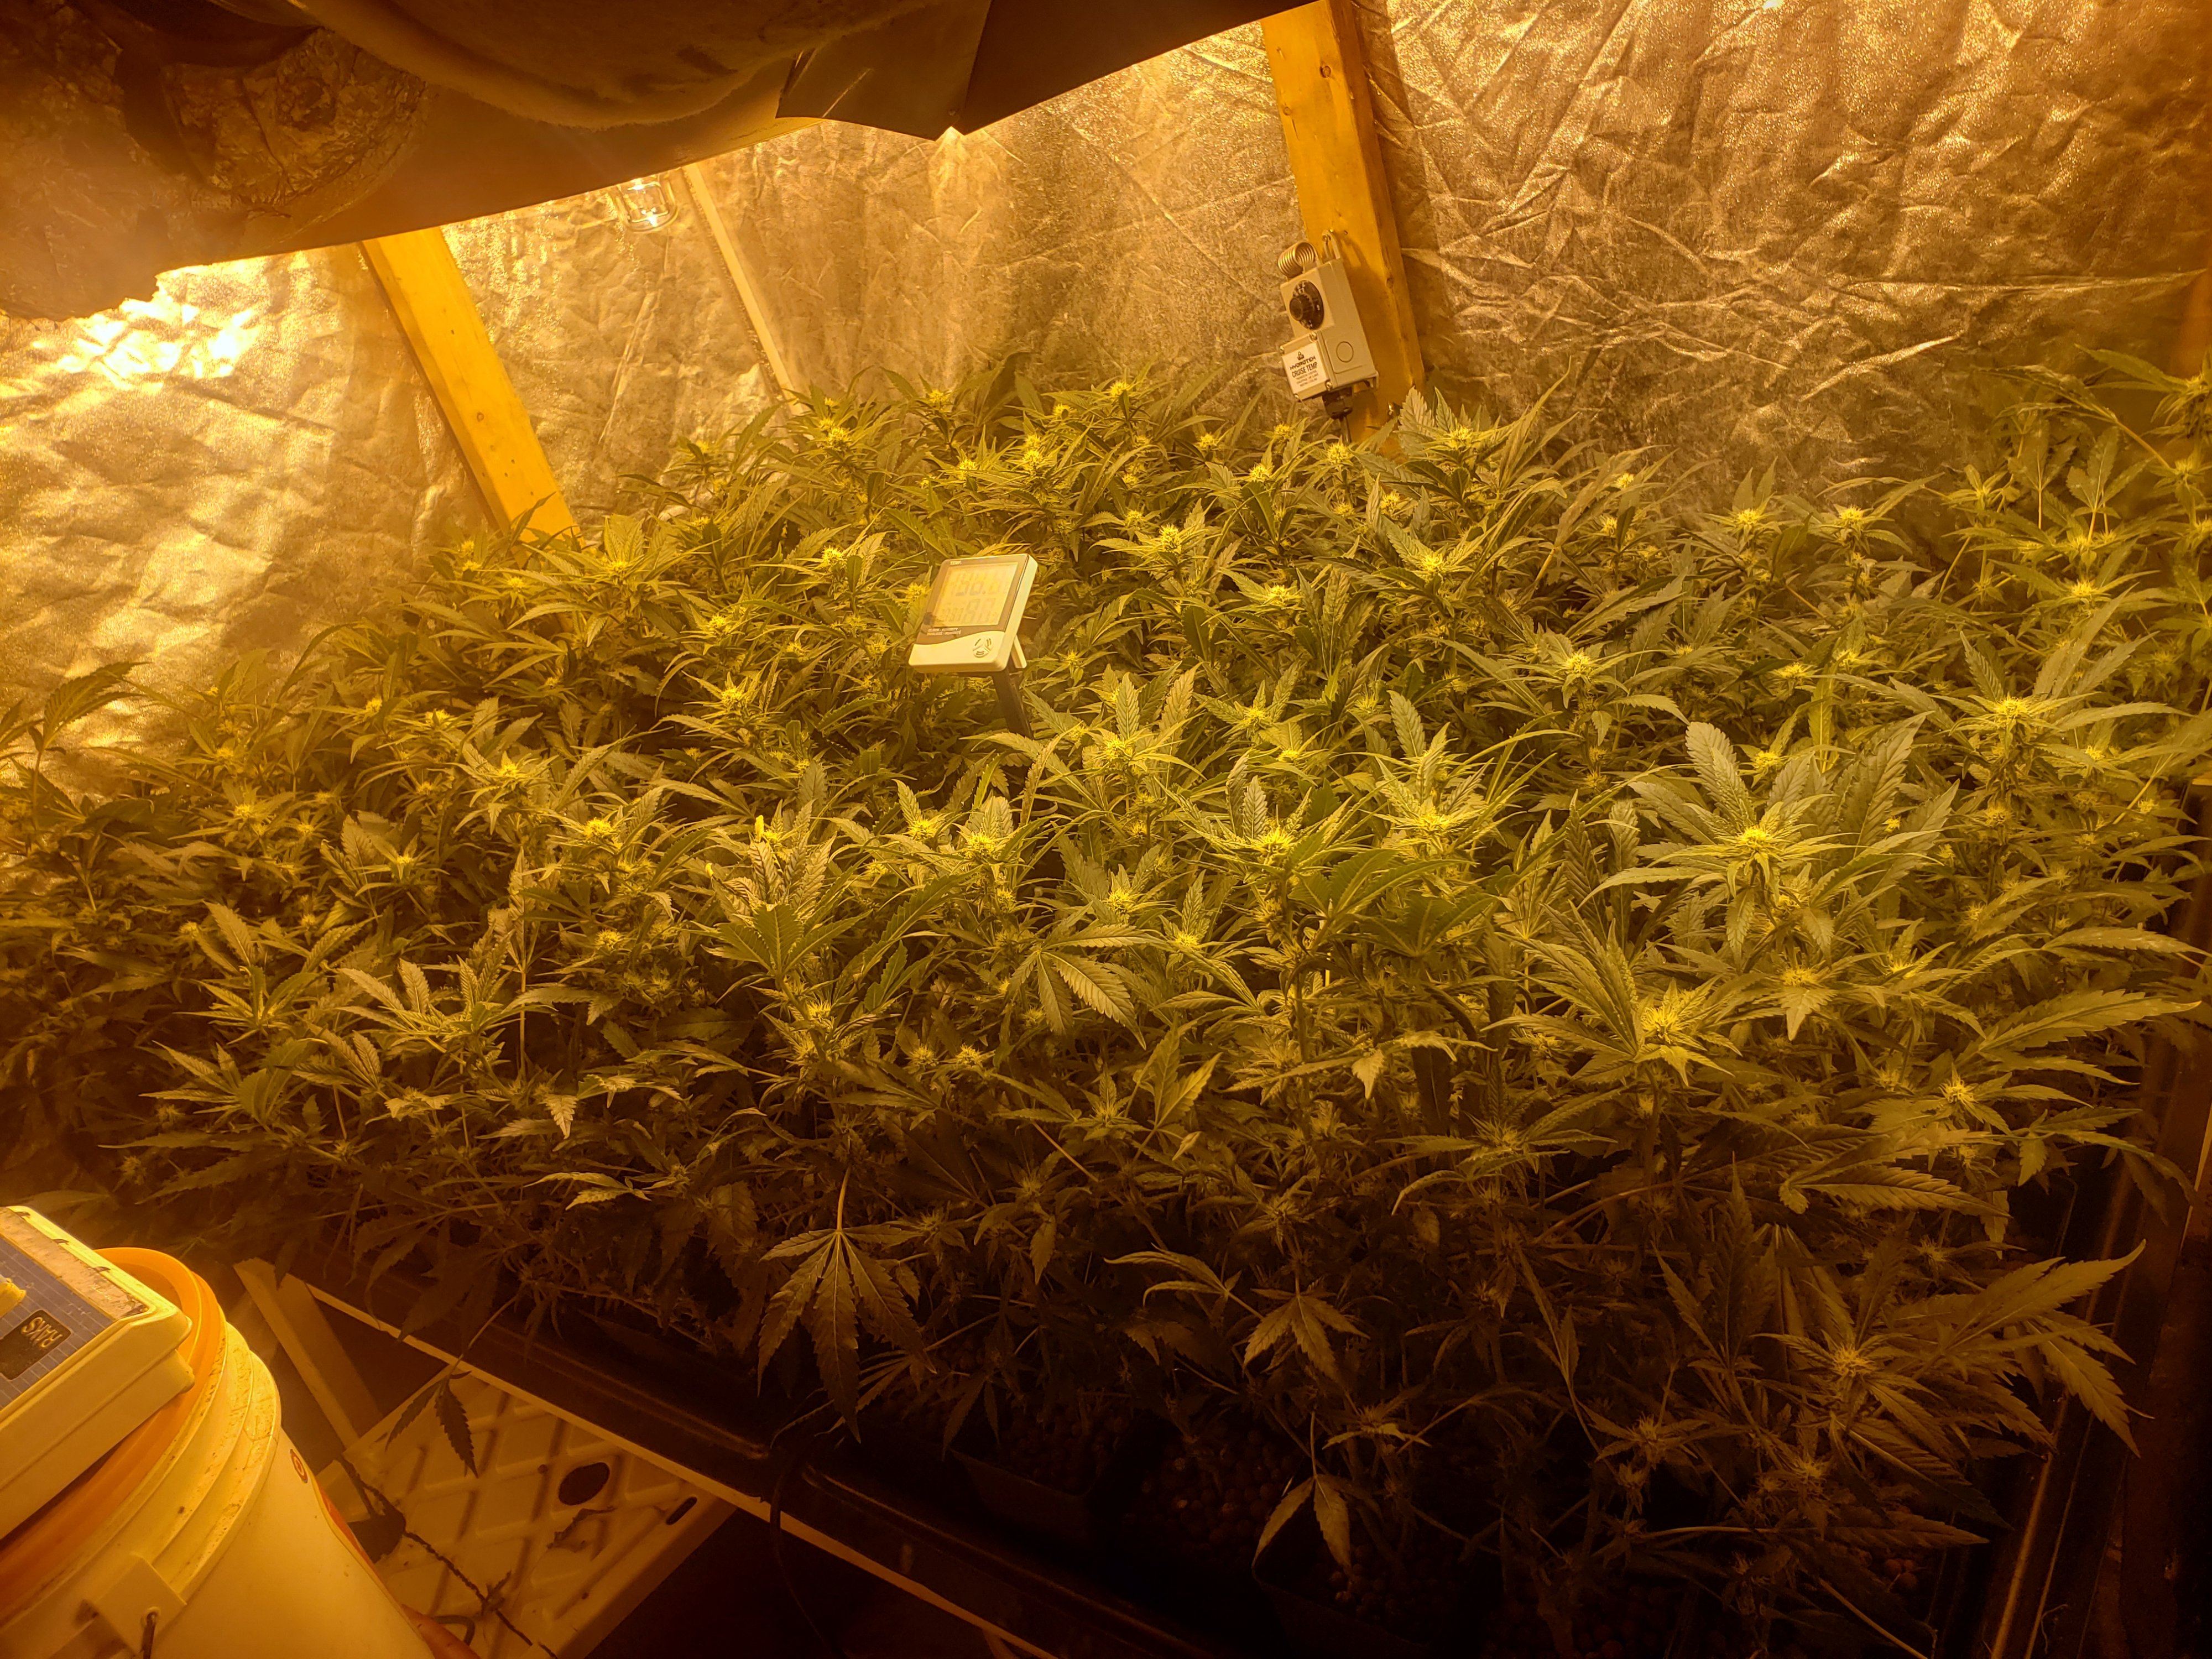 87 plants in a 4x6 with 1600 watts